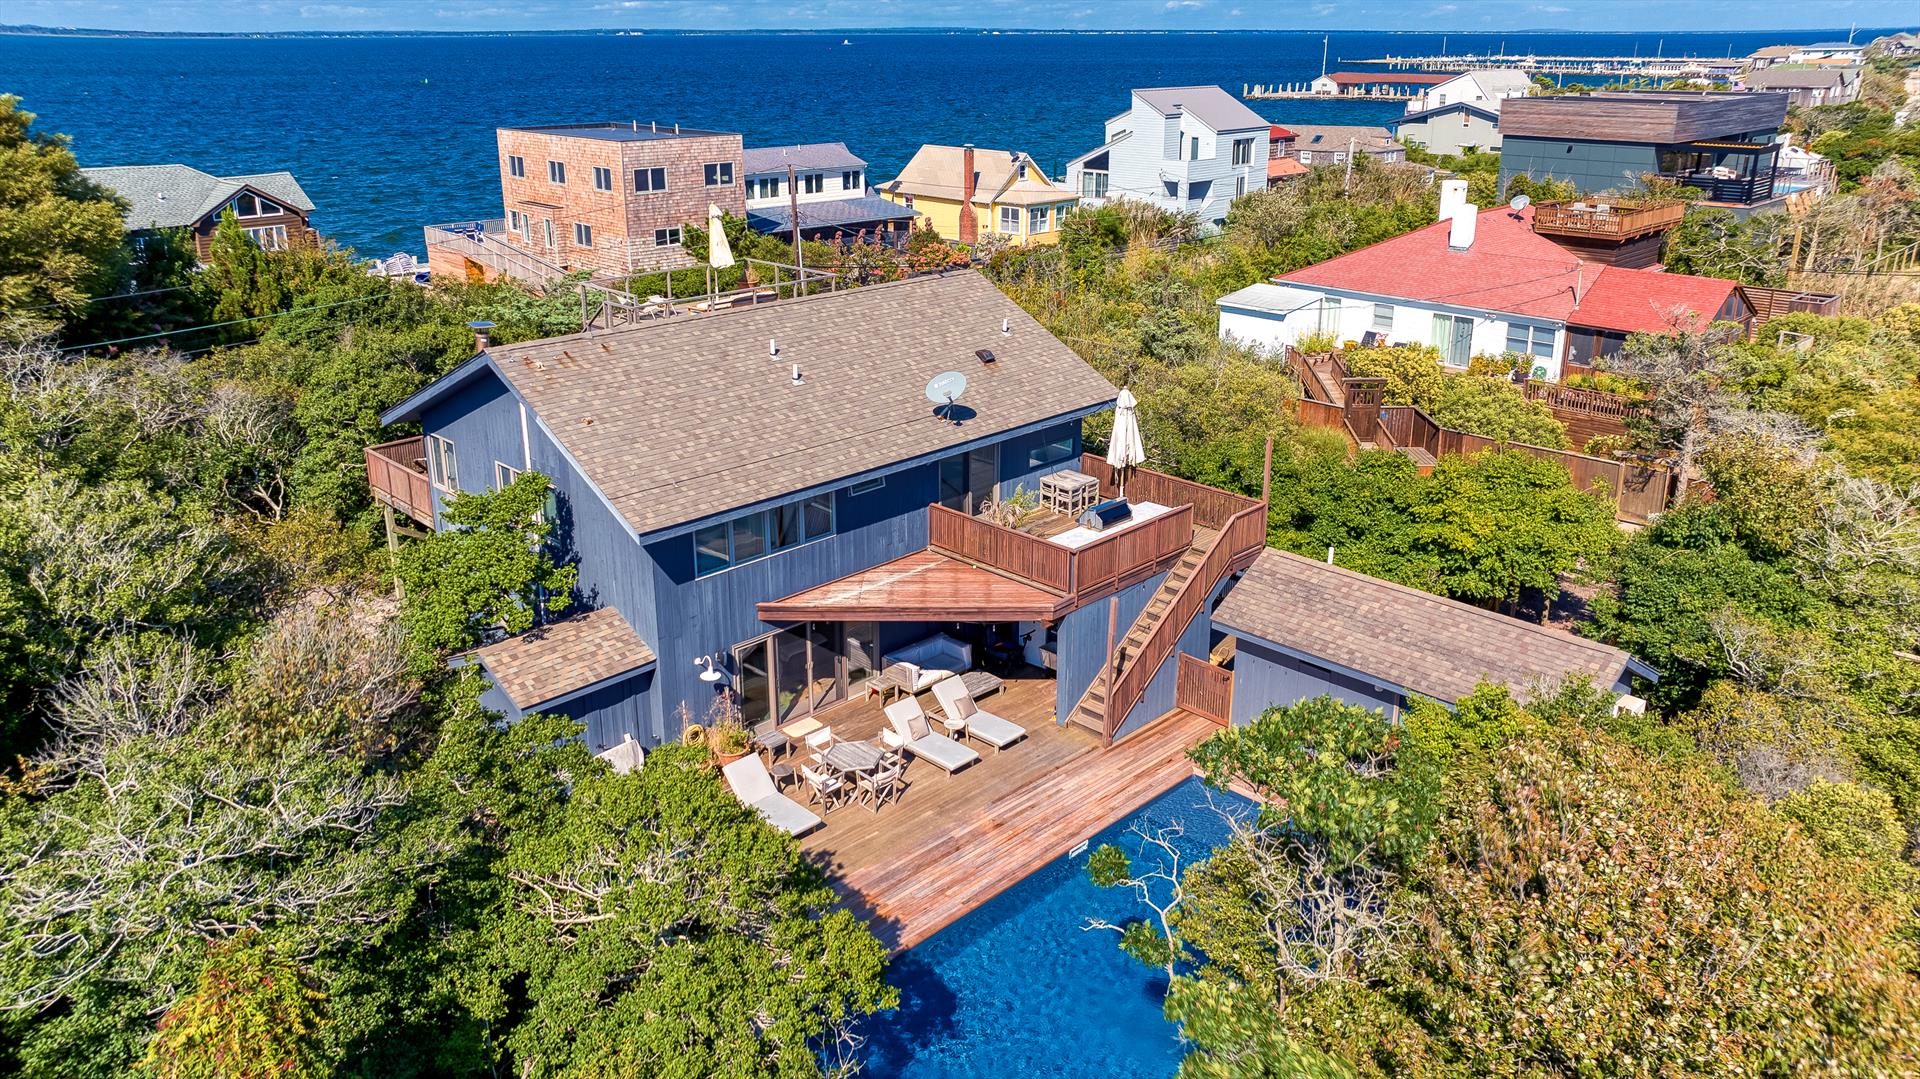 This stunning home with pool and hot tub sits on a massive 125' X 100' lot in highly desirable Ocean Bay Park. With over 2,400 square feet of living space, this is one of Ocean Bay Park's finest homes, boasting 5 bedrooms, 4.5 bathrooms and spacious decks for entertaining. The large second floor great room features soaring cathedral ceilings, bay views, and a wood burning fireplace.  The open and bright chef's kitchen provides tons of storage, a massive island, and top of the line appliances including a Subzero refrigerator and Viking range. The great room opens into a beautiful screened in dining area, allowing the whole second floor to feel as if it is open to the air.  Sun-filled primary bedroom with private ensuite located on second floor.  Head up to the roof deck to enjoy the breathtaking sunsets over the Great South Bay!  A separate grilling deck with built in BBQ is conveniently located just off of the kitchen, and has stairs down to the pool deck for great entertaining flow.  The main pool and deck area are uncommonly large, and are surrounded by lush trees for privacy.  Relax below the trellis, soak in the hot tub or grab a drink at the outdoor bar for your convenience. Just off the pool deck is a spacious first floor den with a built-in desk for an ideal remote working space! Three additional bedrooms and two full bathrooms are also located on the first floor. The separate guest cottage has its own private full bath. This fully air conditioned and heated home will keep you comfortable for the extended season!  This very special home is shown by appointment only!